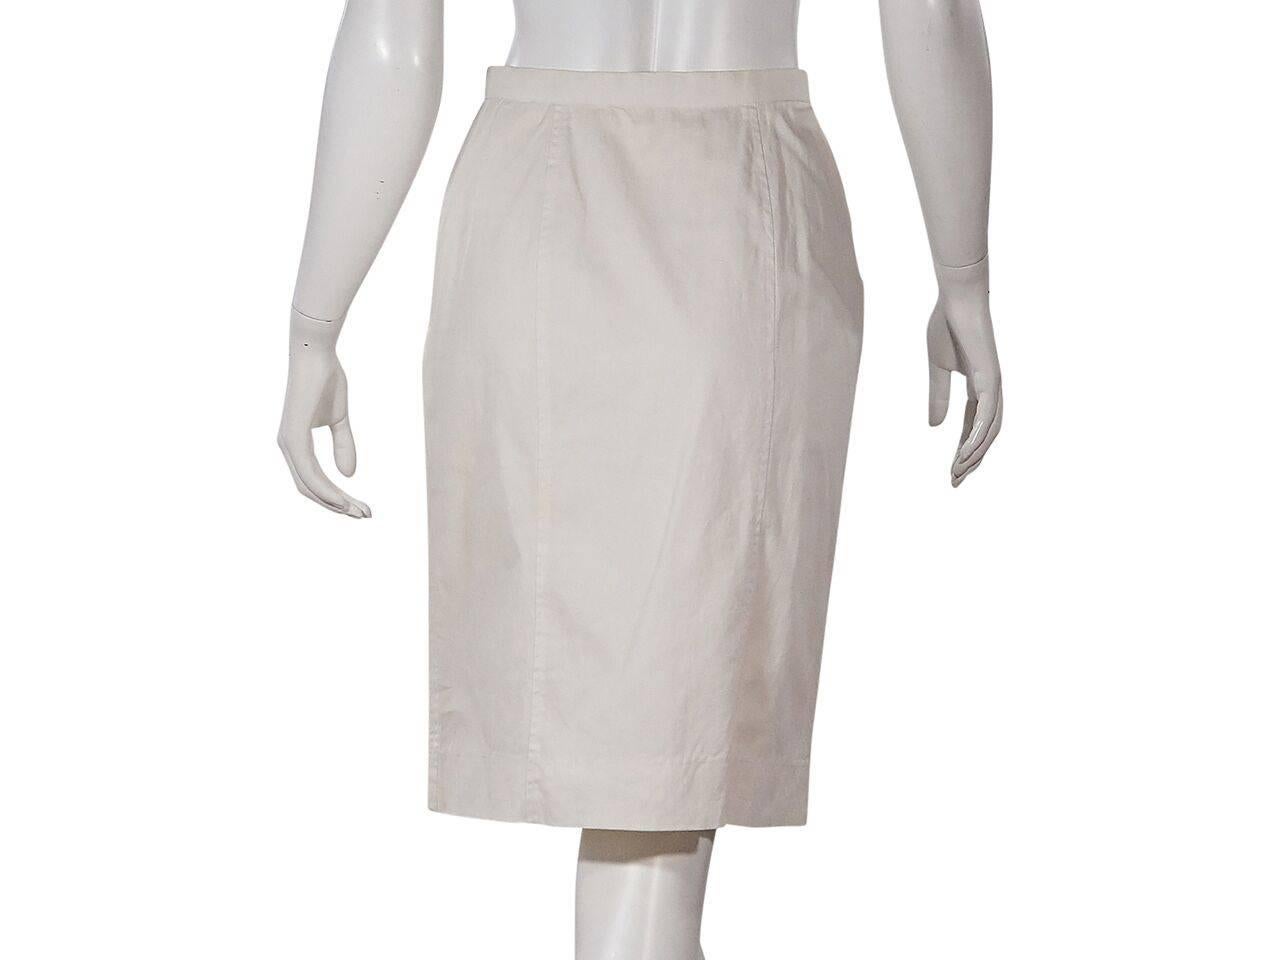 Product details:  Vintage white pencil skirt by Chanel.  Banded waist.  Double button front.  Front slide pockets.  Goldtone hardware. 
Condition: Pre-owned. Very good.
Est. Retail $ 1,000.00